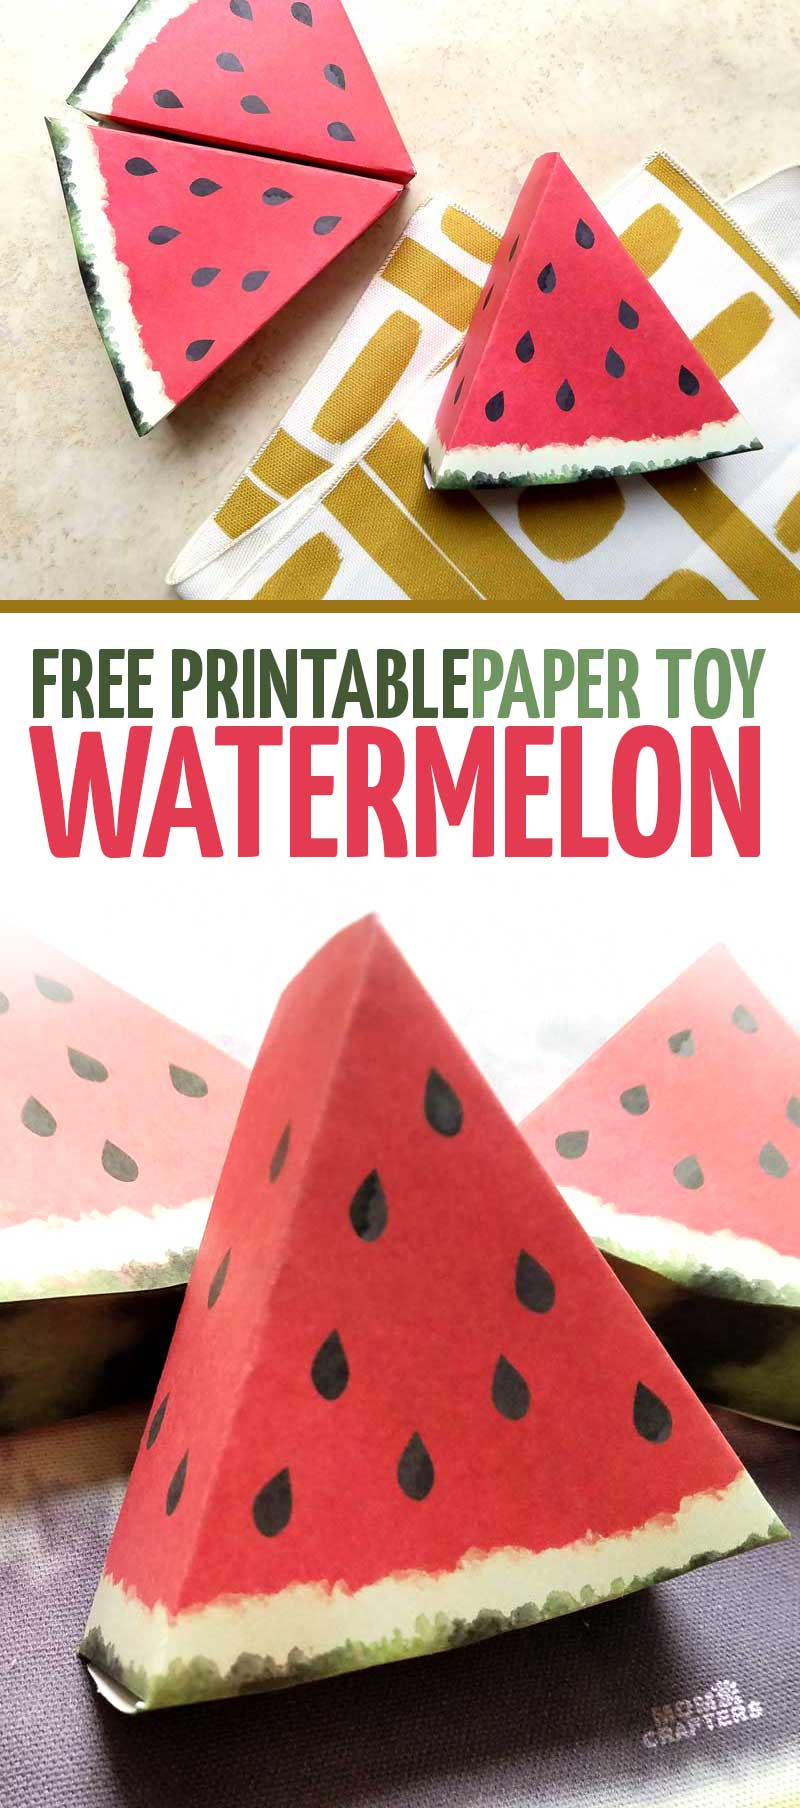 Paper Craft Templates For Play Fruit: Watermelon – Moms And Crafters - Free Printable Paper Crafts